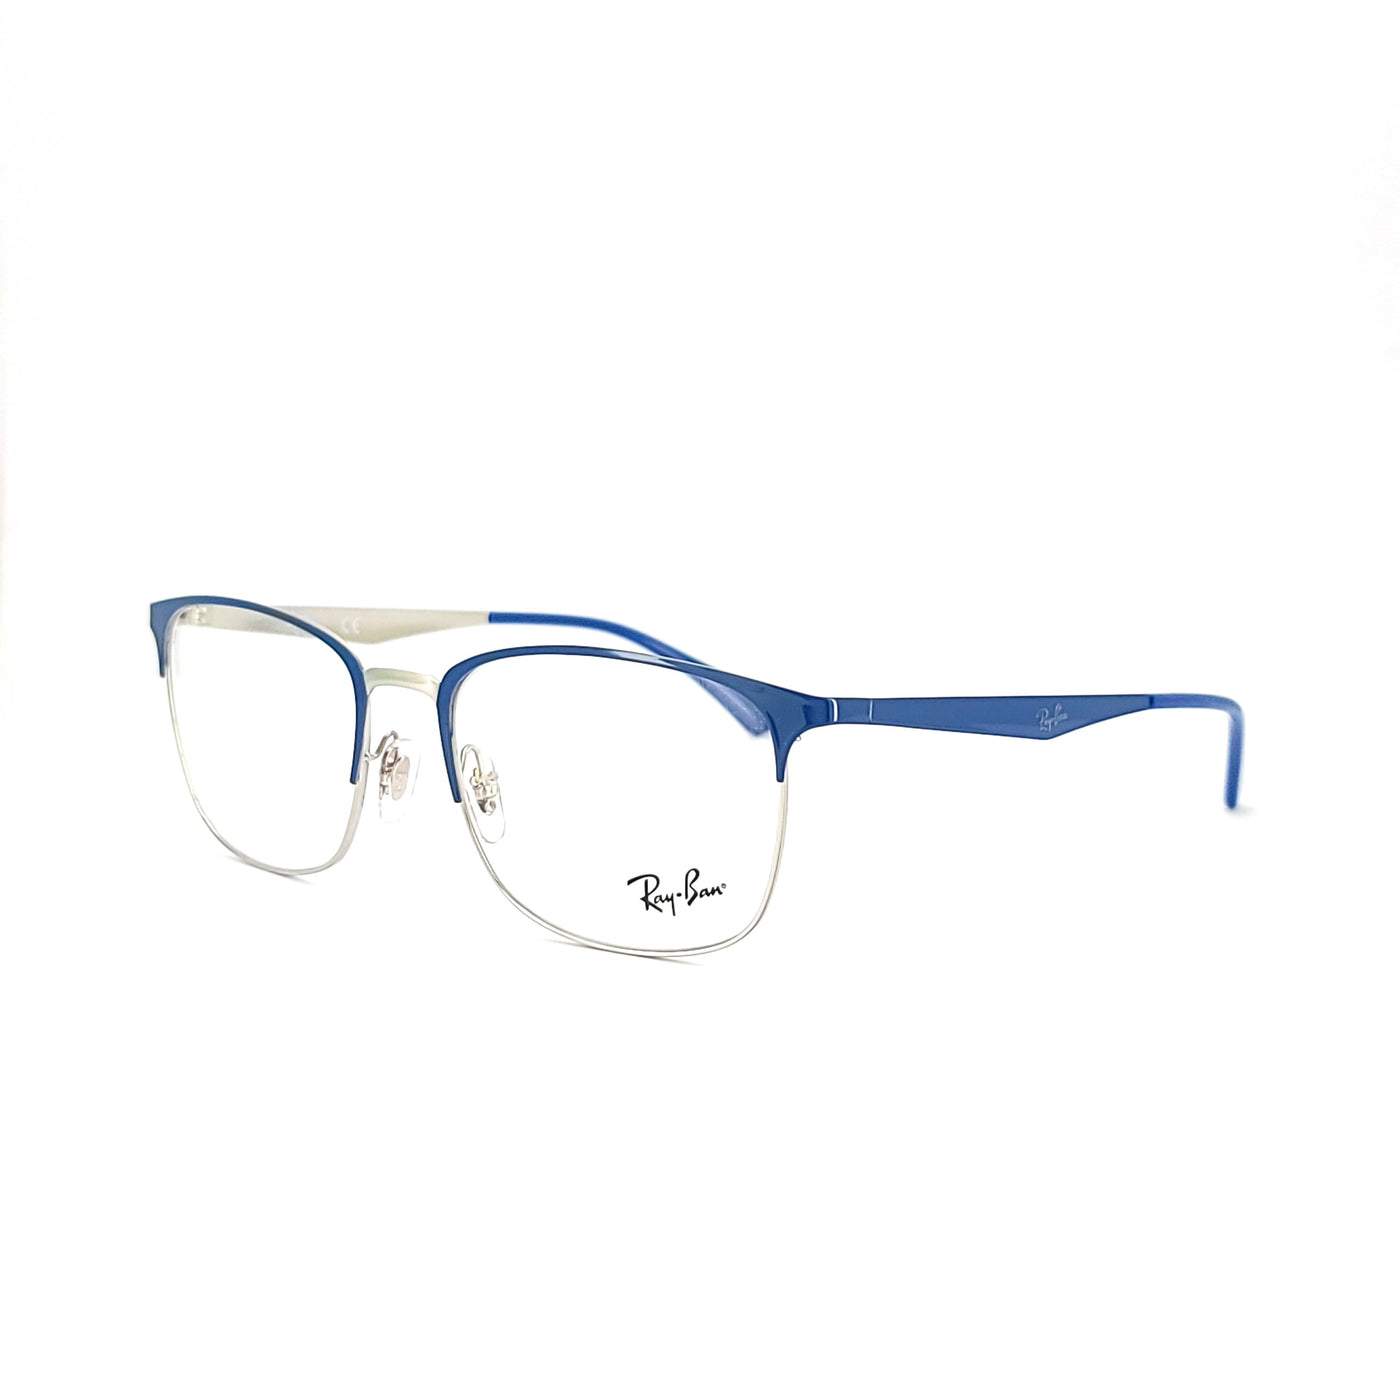 Ray-Ban Highstreet RB6421/3101_54 | Eyeglasses - Vision Express Optical Philippines